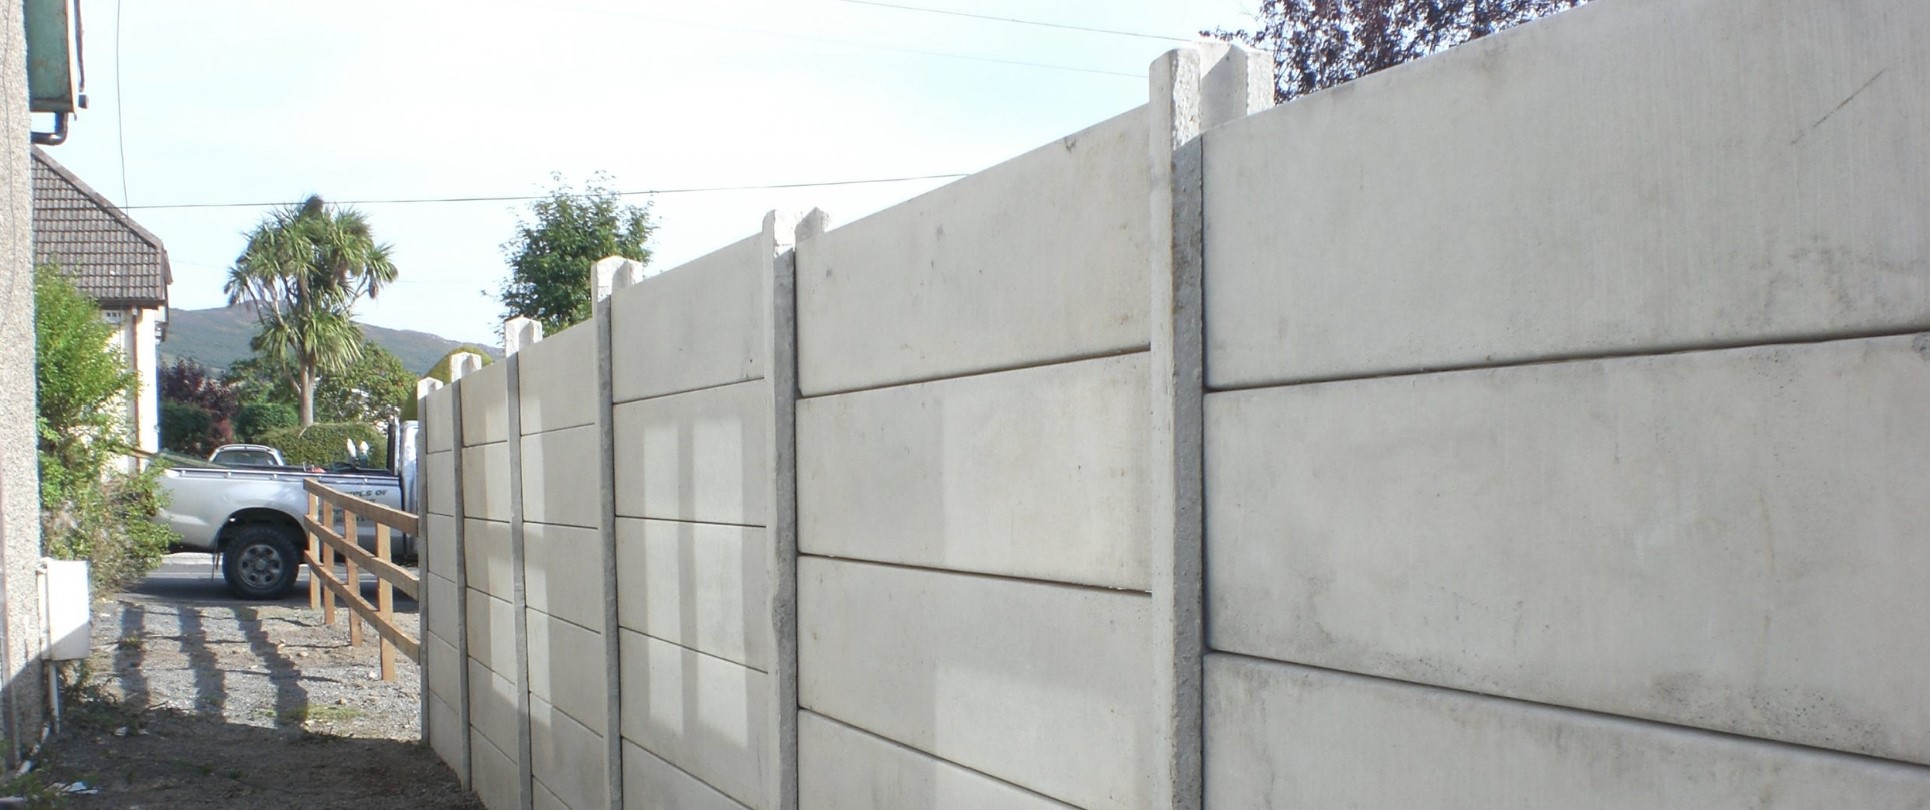 concrete fence installers auckland